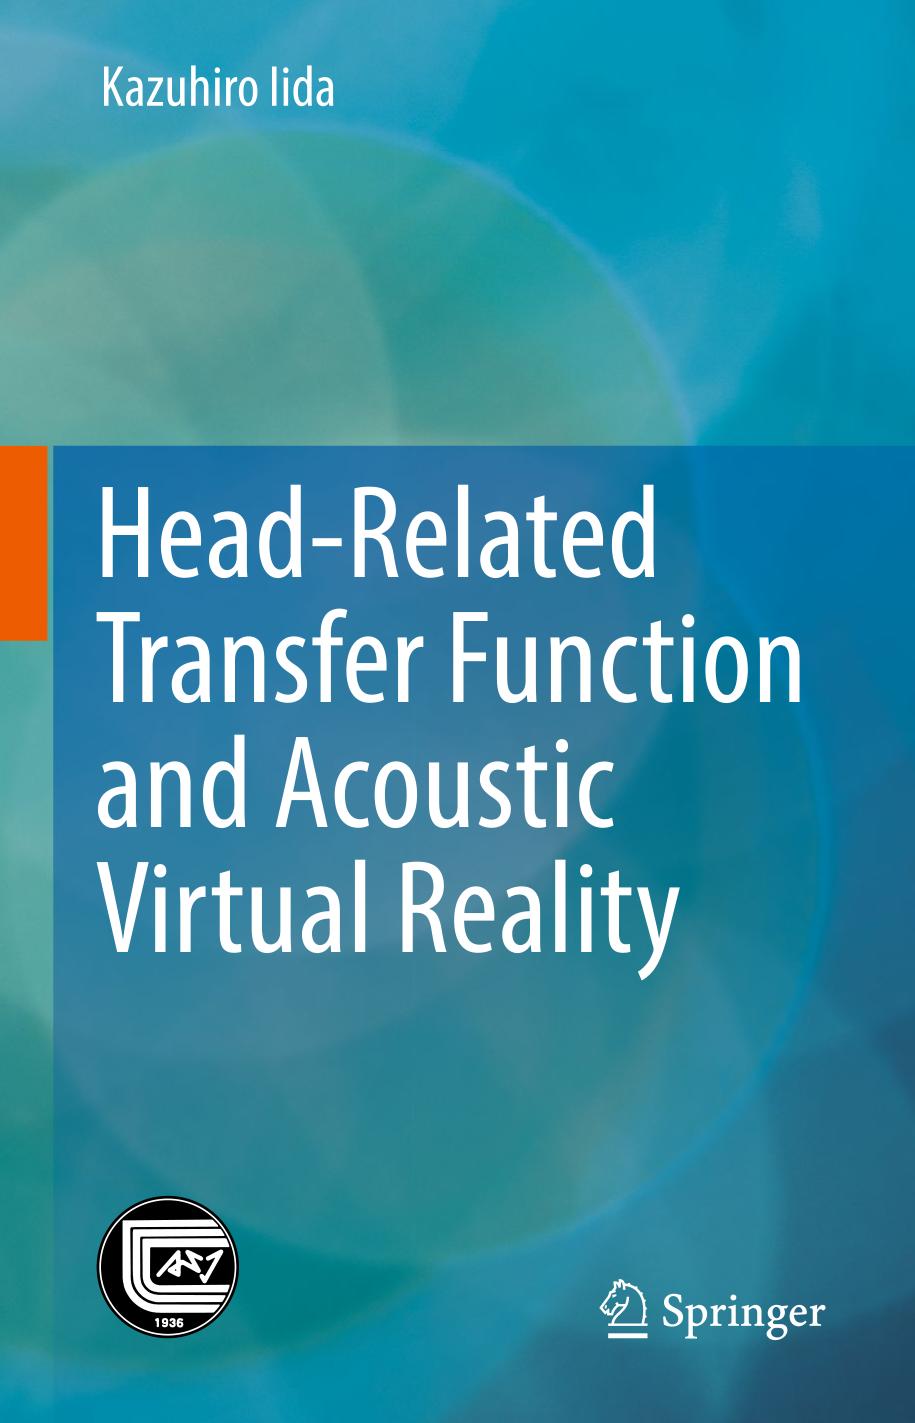 Head-related transfer function and acoustic virtual reality